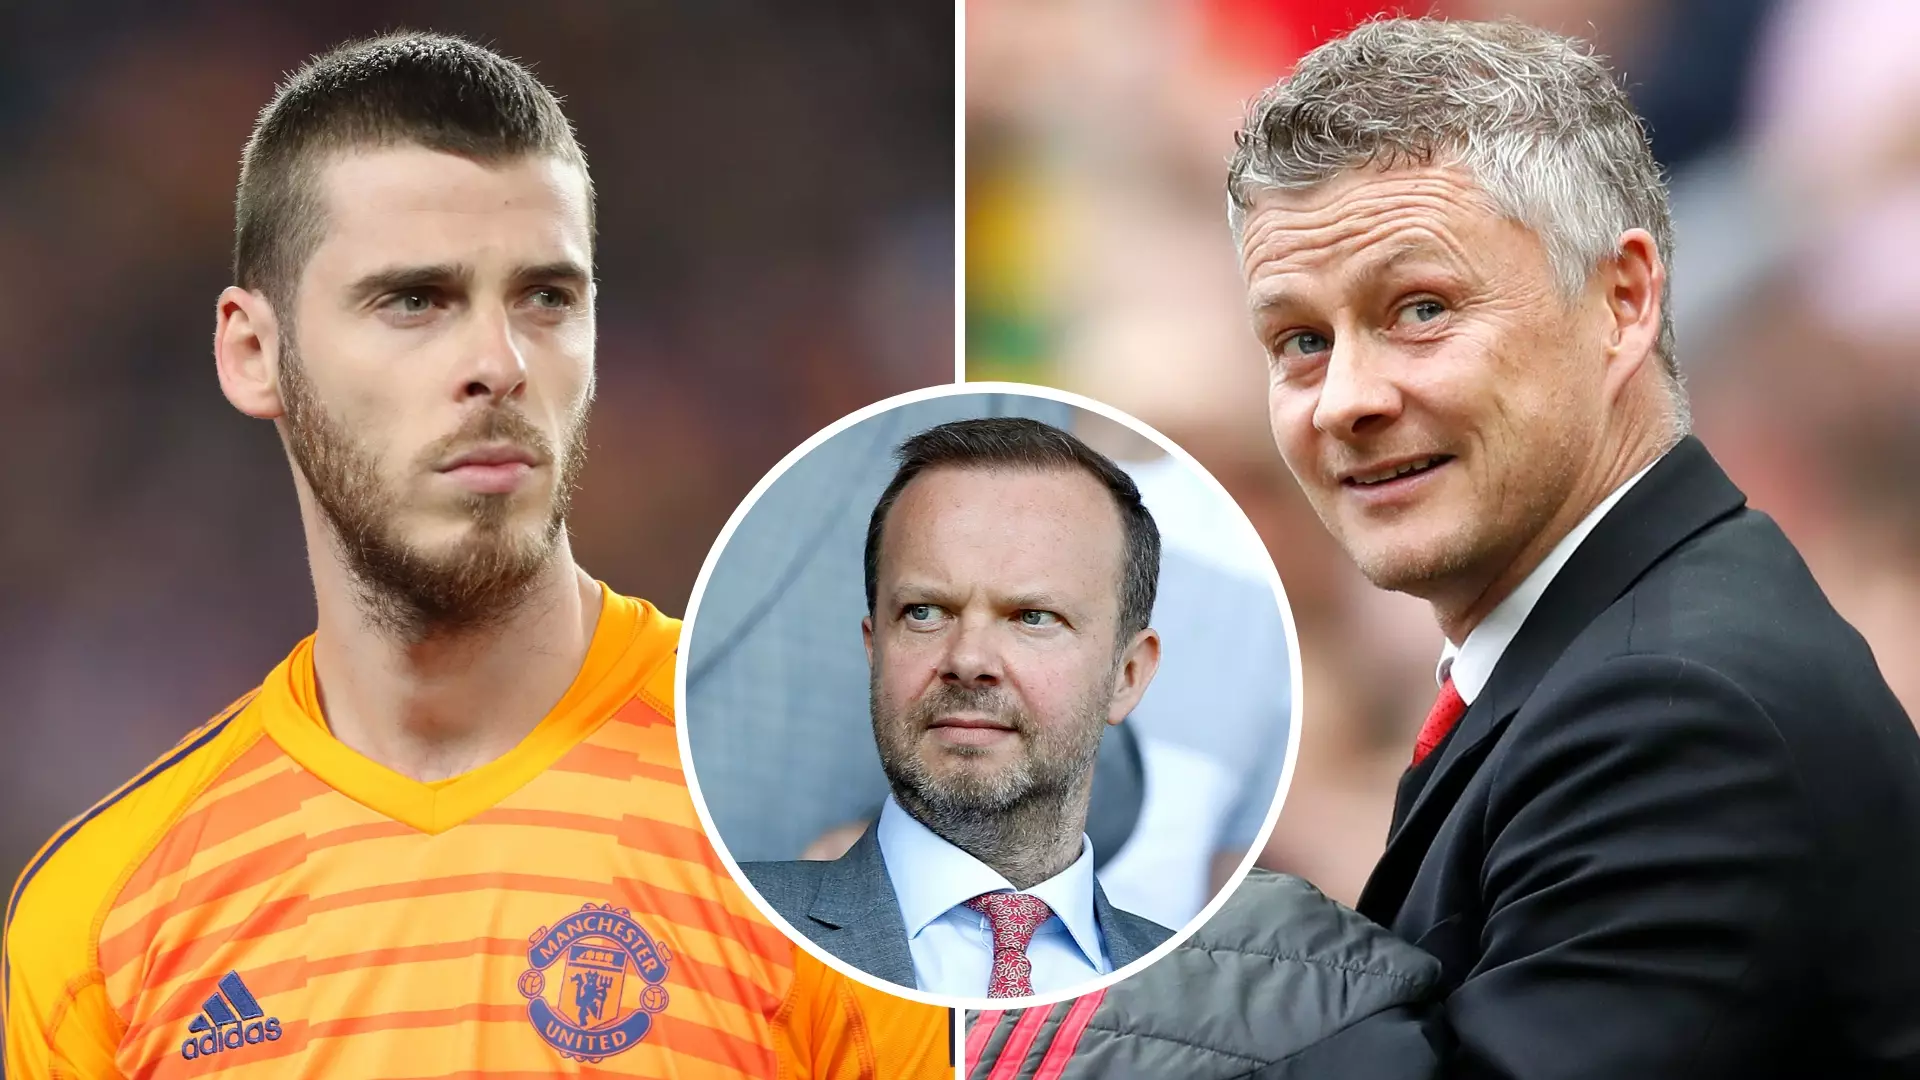 Manchester United Have Already Identified A Replacement Goalkeeper For David De Gea